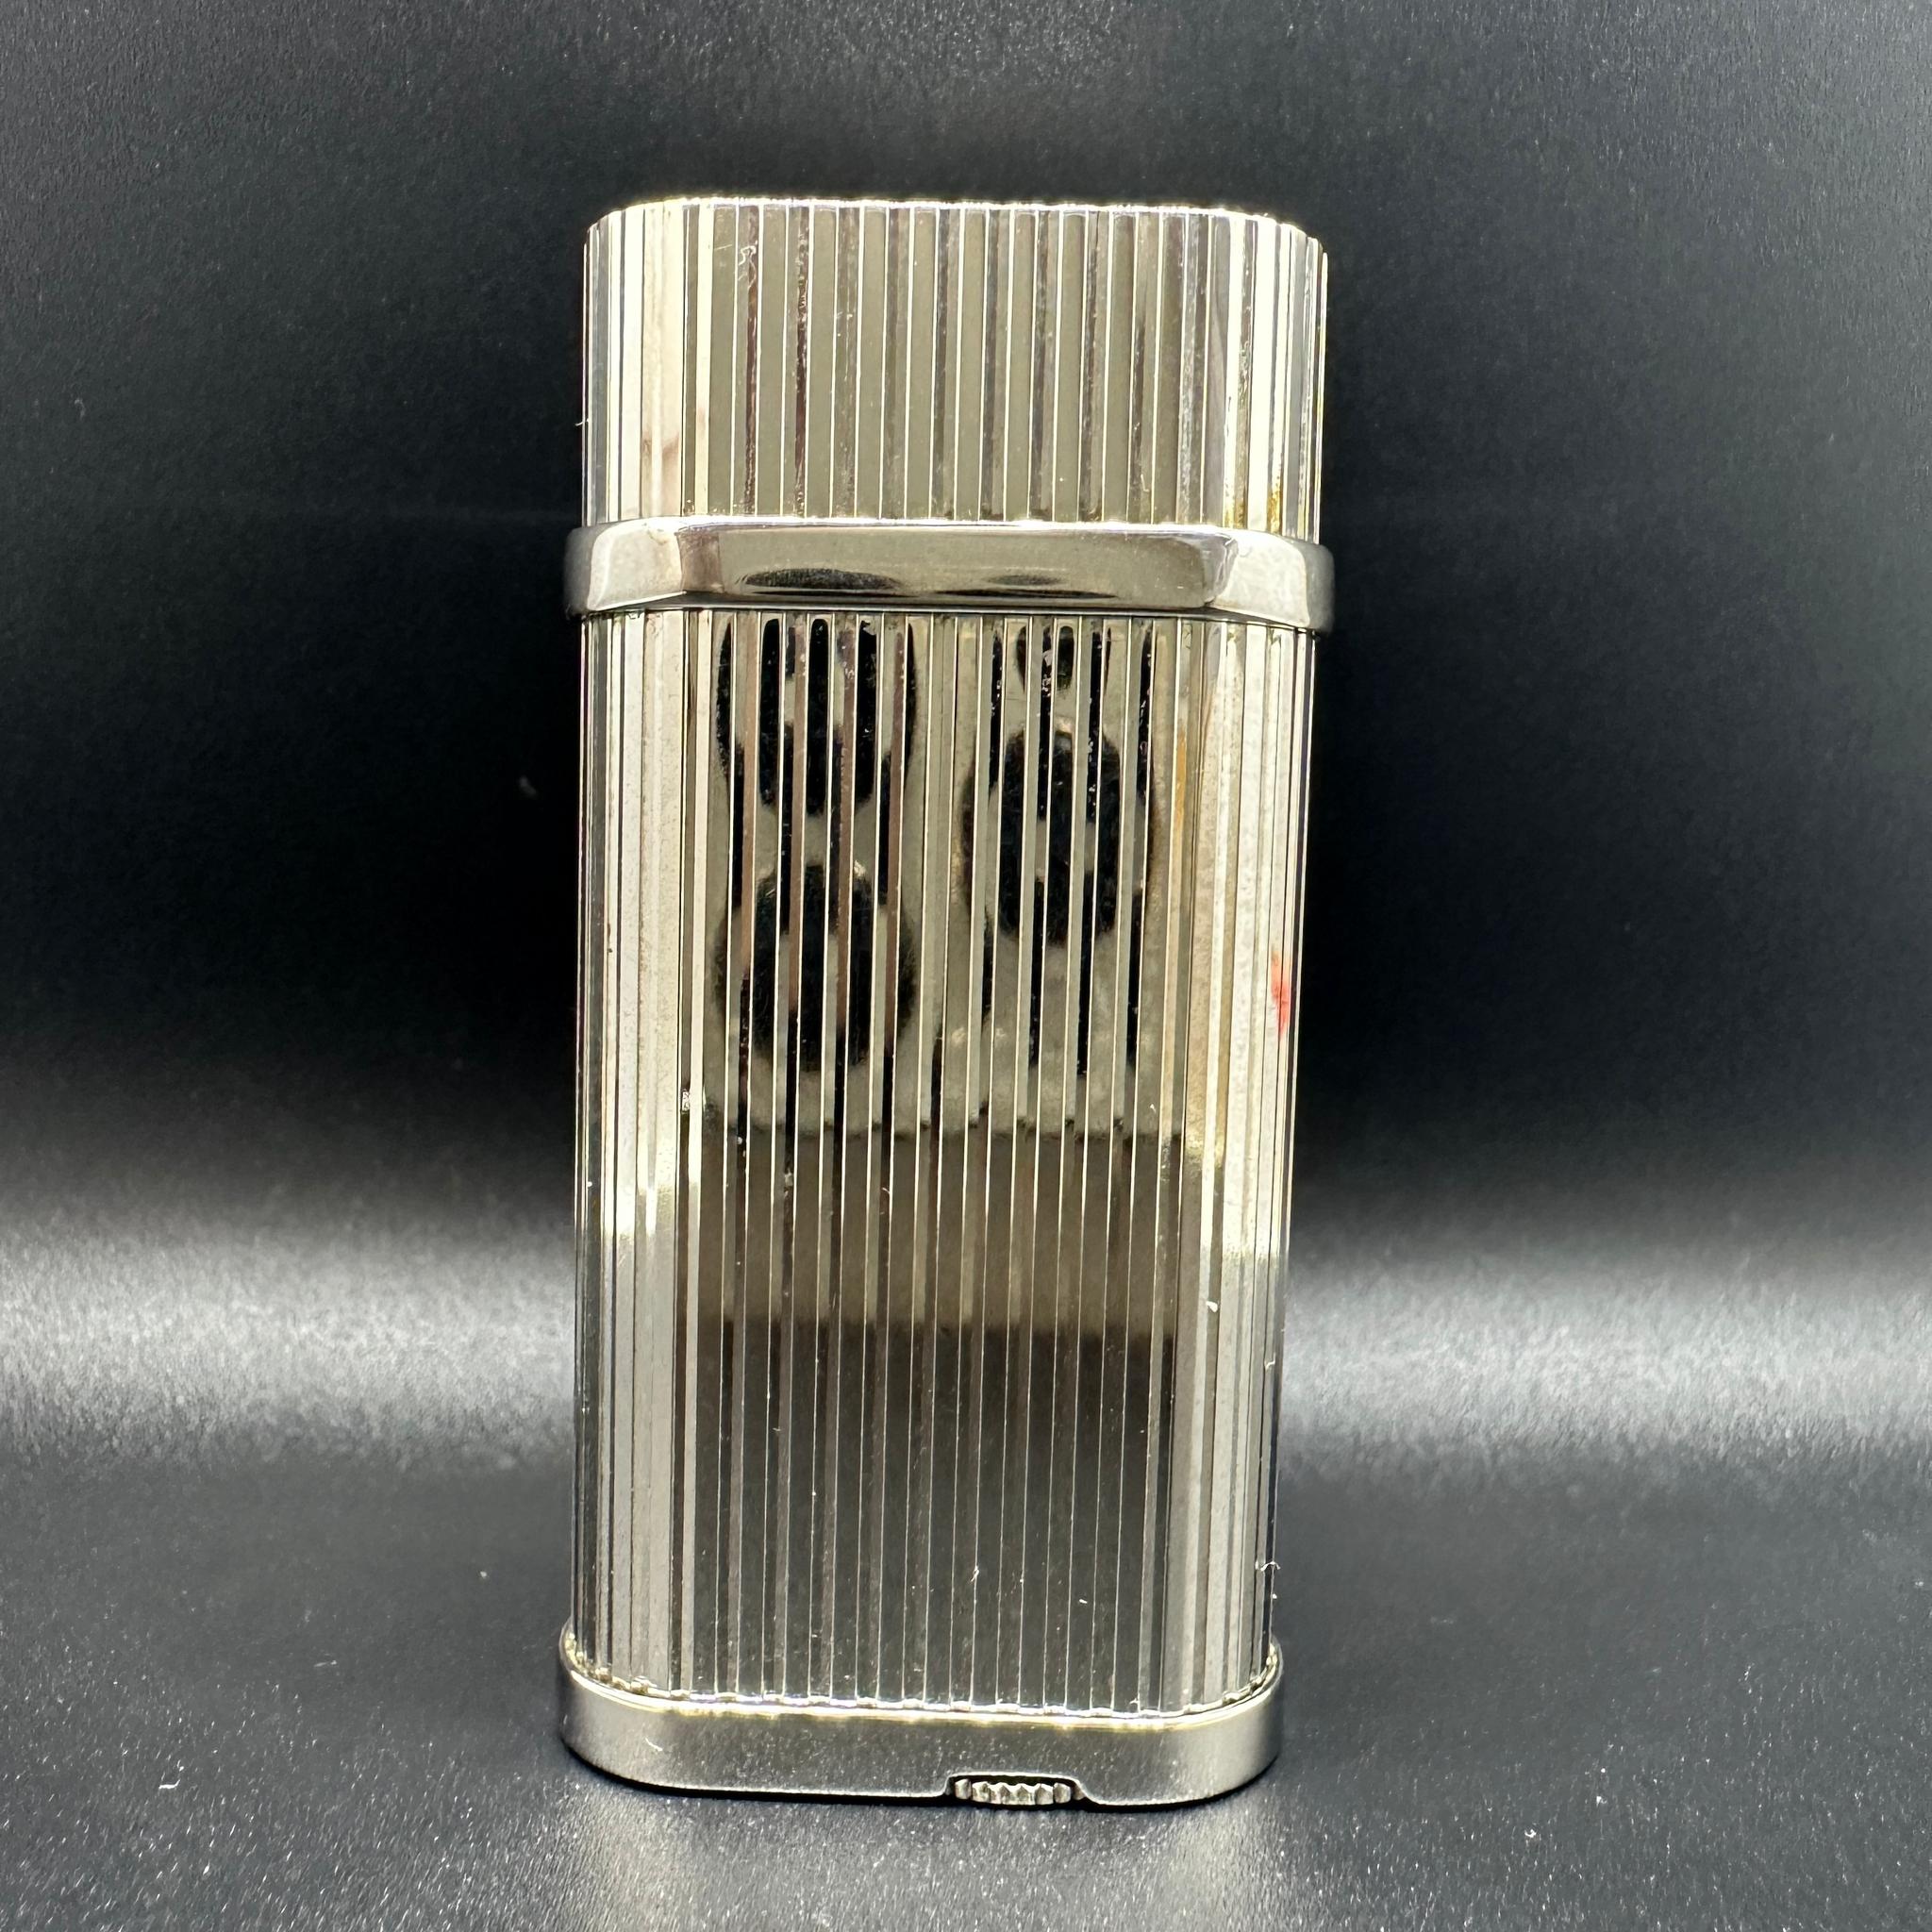 Le must de Cartier lighter 
Silver Cartier Gas Lighter Platinum finish
In Mint condition
Comes in original Cartier box 
With original Cartier papers 
The lighter is compact and beautiful and works perfectly. 
Collectable
Chic, retro and elegant
All